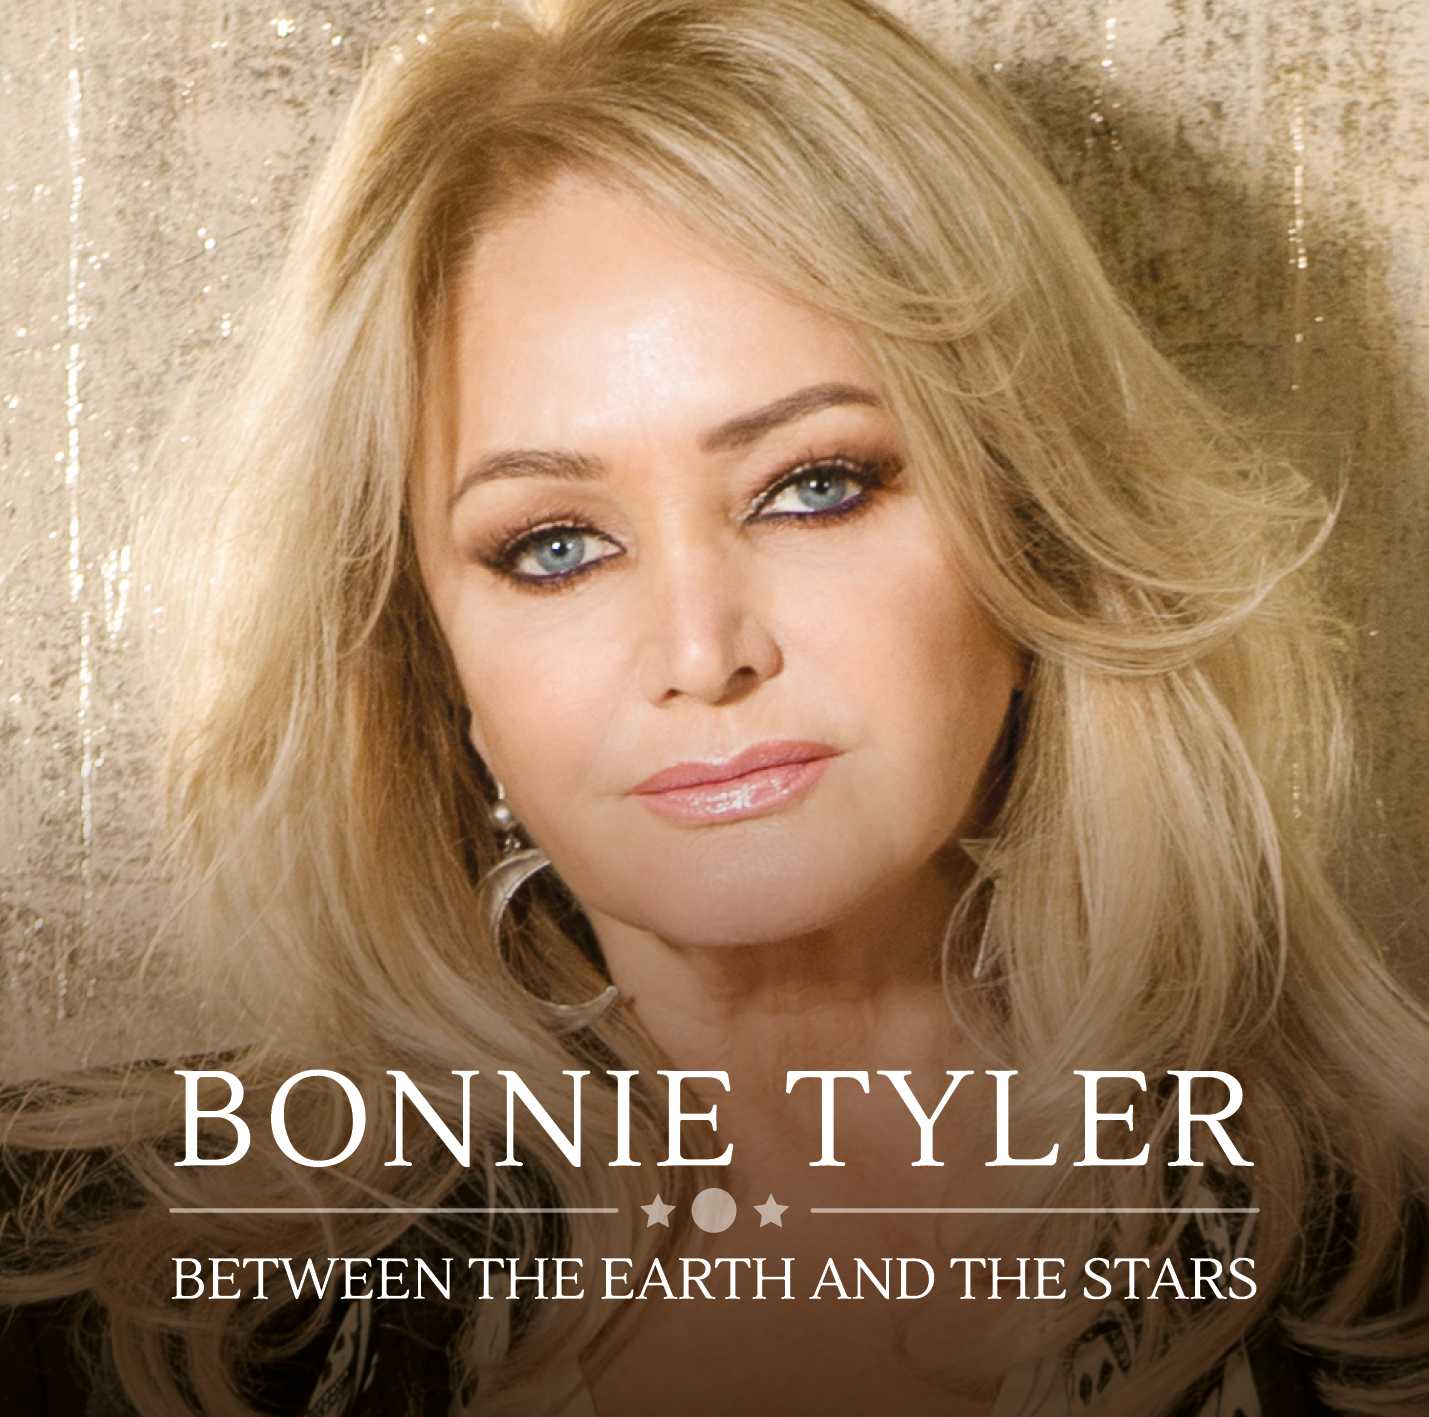 Bonnie Tyler - “Between The Earth And The Stars“ (earMUSIC/Edel) 